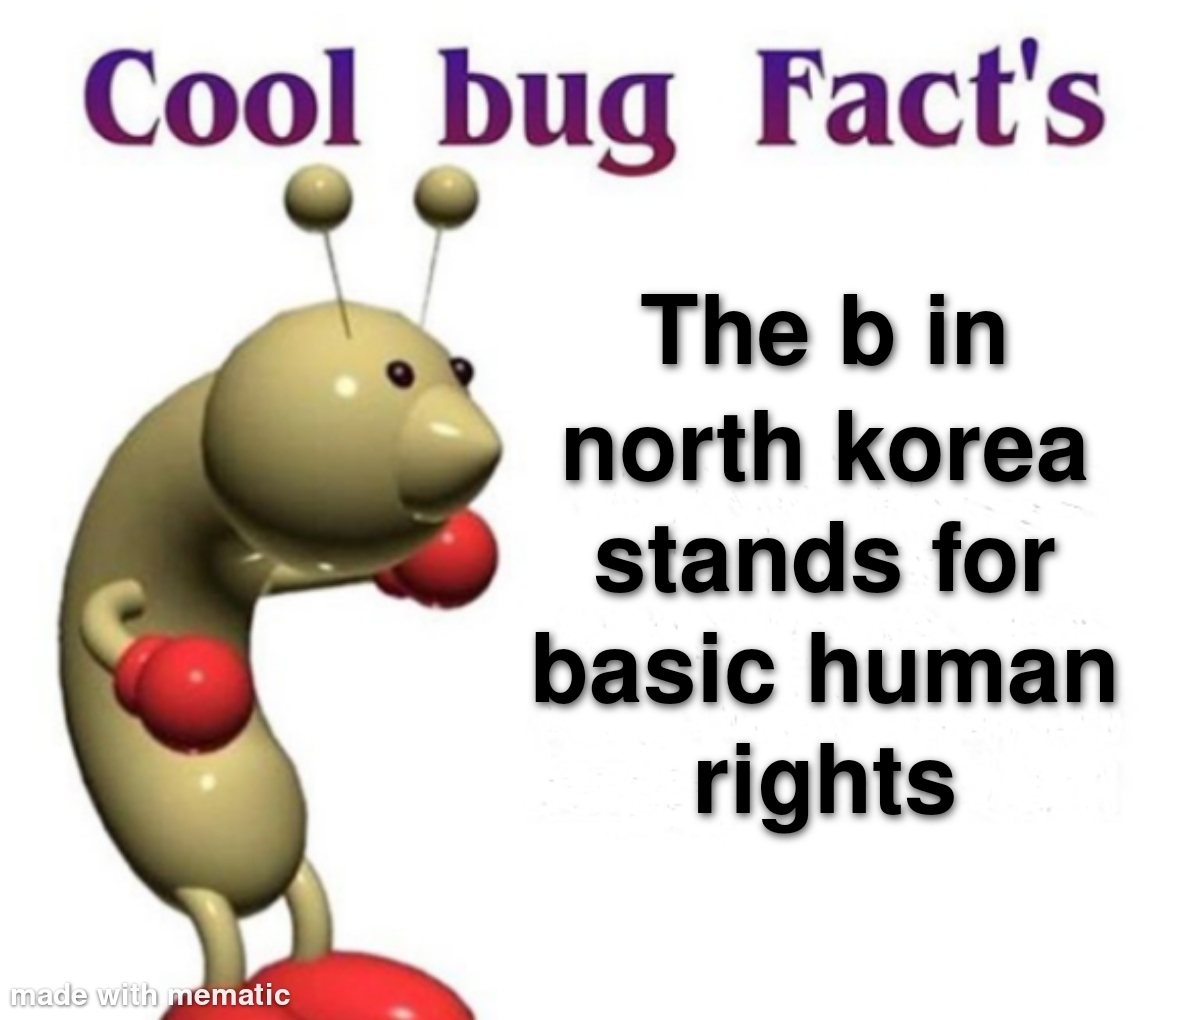 cartoon - Cool bug Fact's The b in north korea stands for basic human rights made with mematic